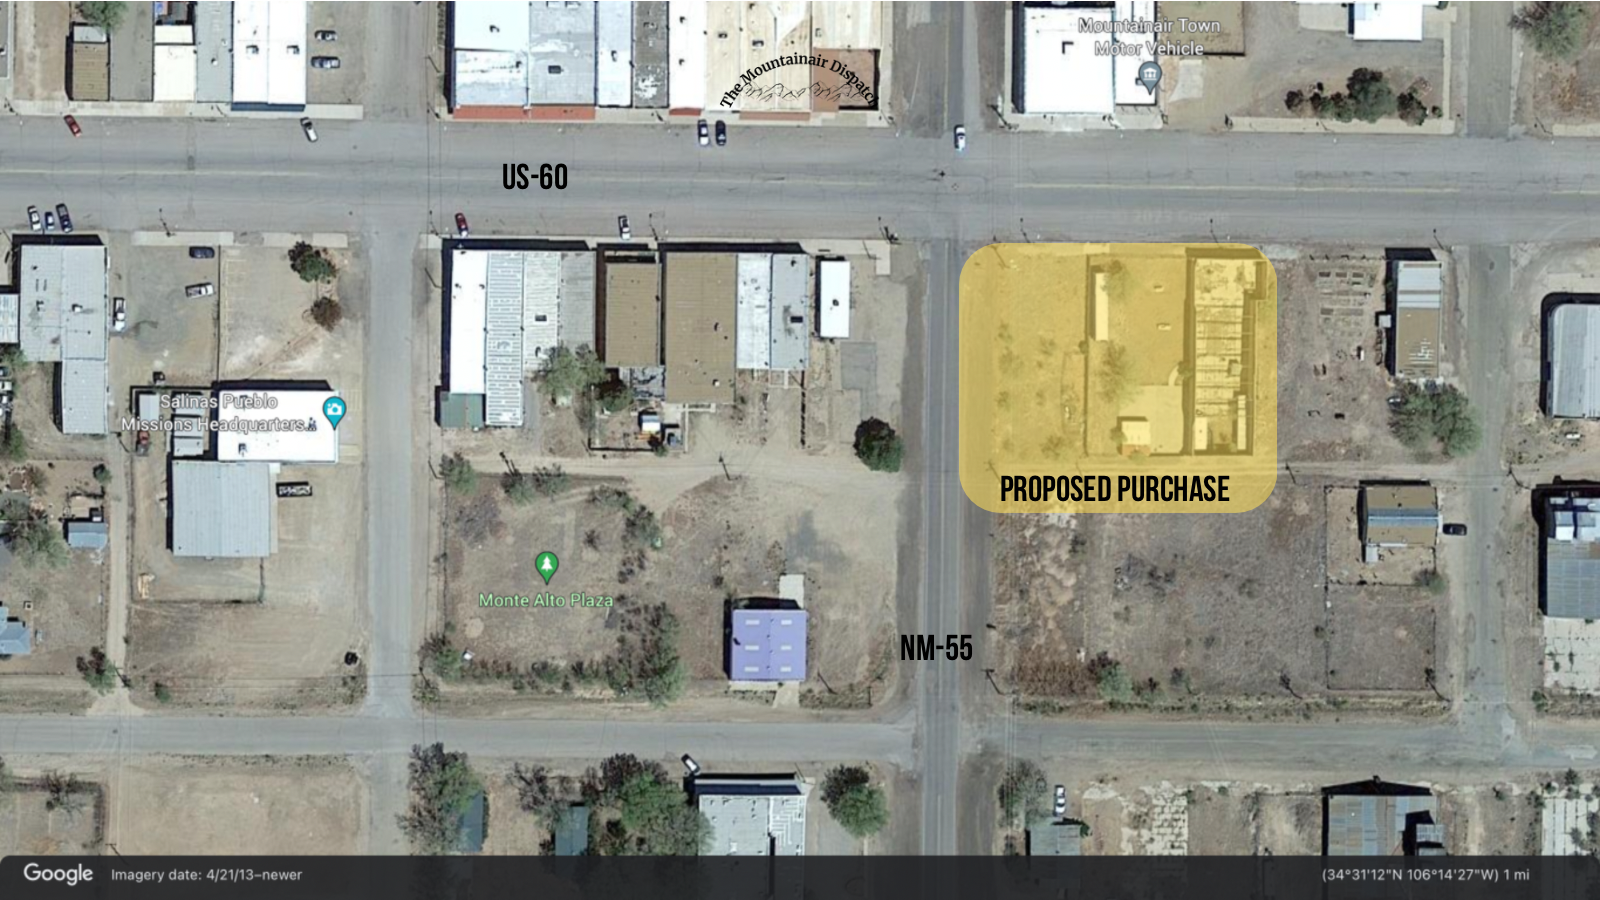 Satellite imagery and an overlay showing the commercial property on the corner of NM-55 and US-60 sought for purchase by John Anaya and his associates. The property includes an abandoned commercial building.